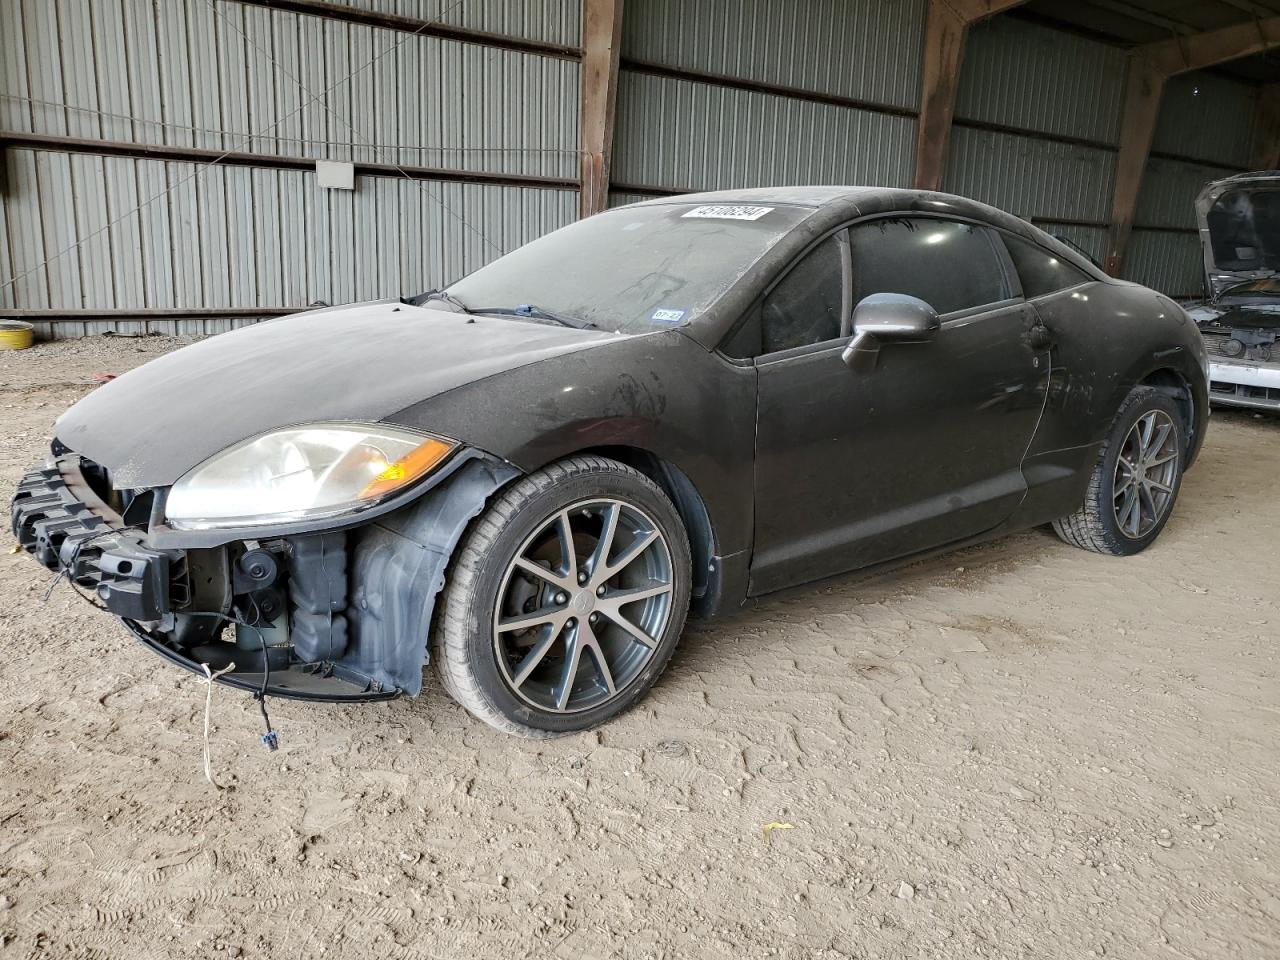 vin: 4A31K5DF5BE003067 4A31K5DF5BE003067 2011 mitsubishi eclipse 2400 for Sale in 77049 1968, Tx - Houston East, Houston, USA